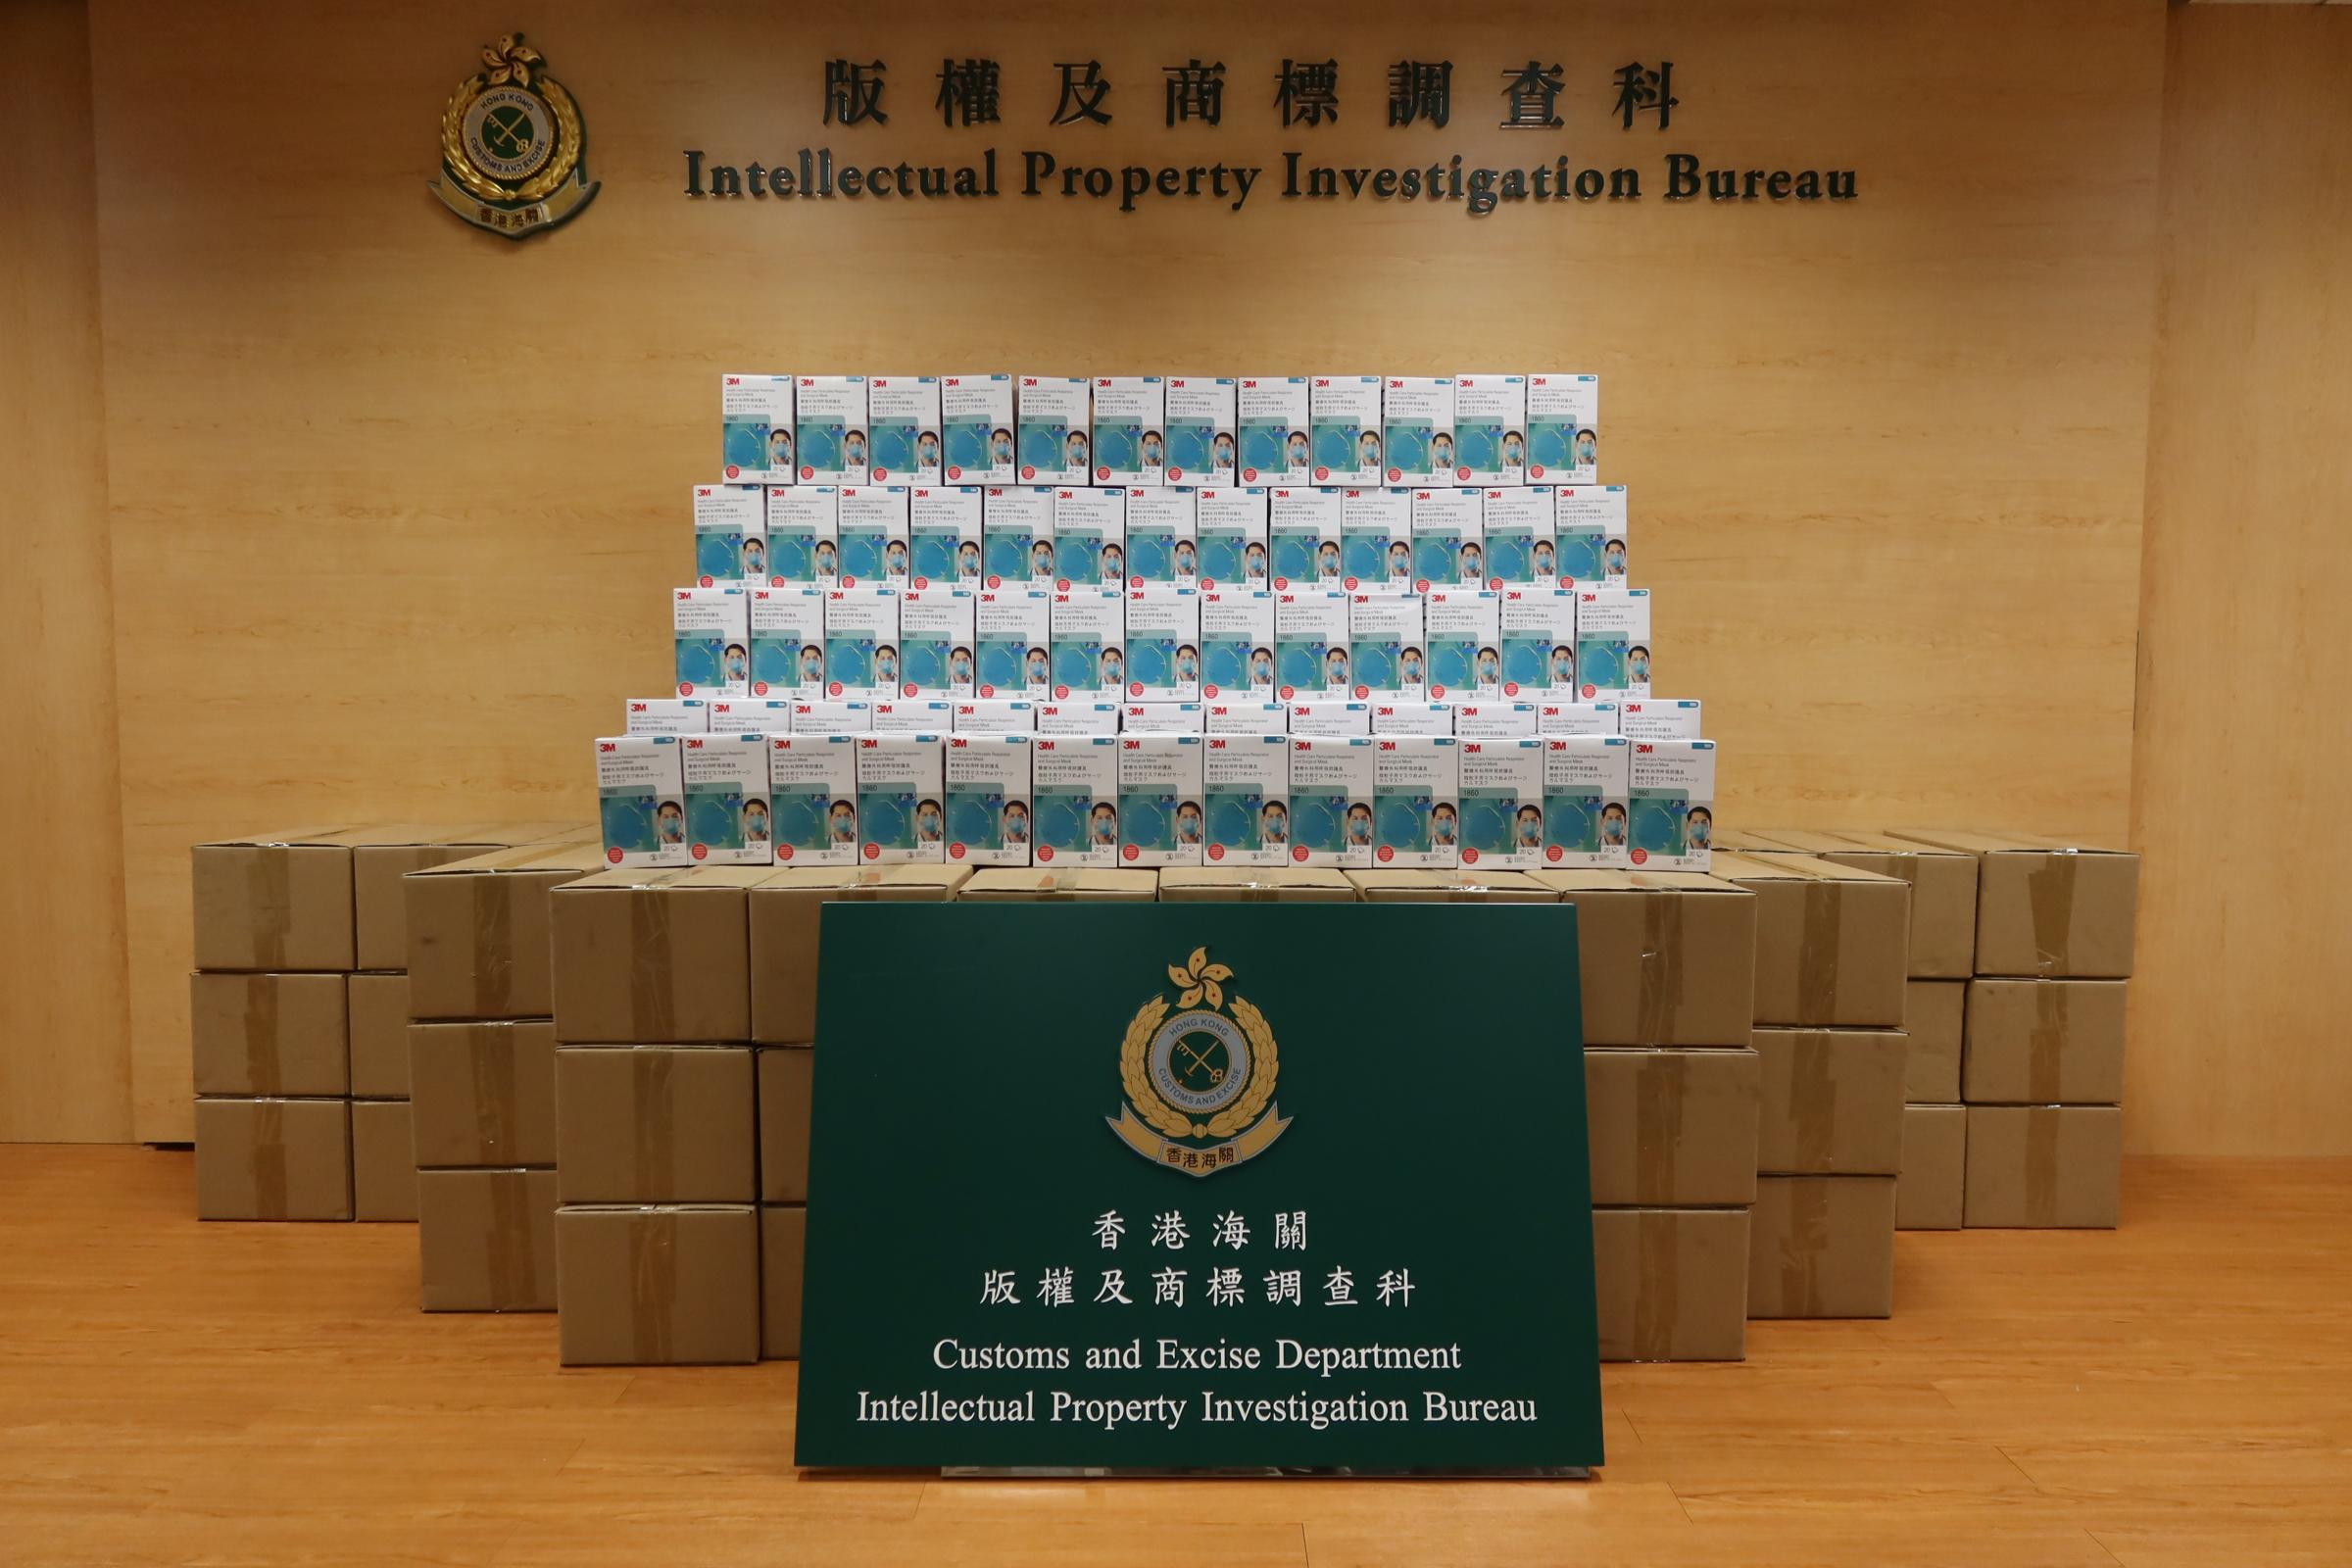 Hong Kong Customs yesterday (February 21) mounted a special operation against counterfeit face masks and seized about 15 000 suspected counterfeit medical-grade face masks with an estimated market value of about $30,000. Photo shows the suspected counterfeit medical-grade face masks seized.